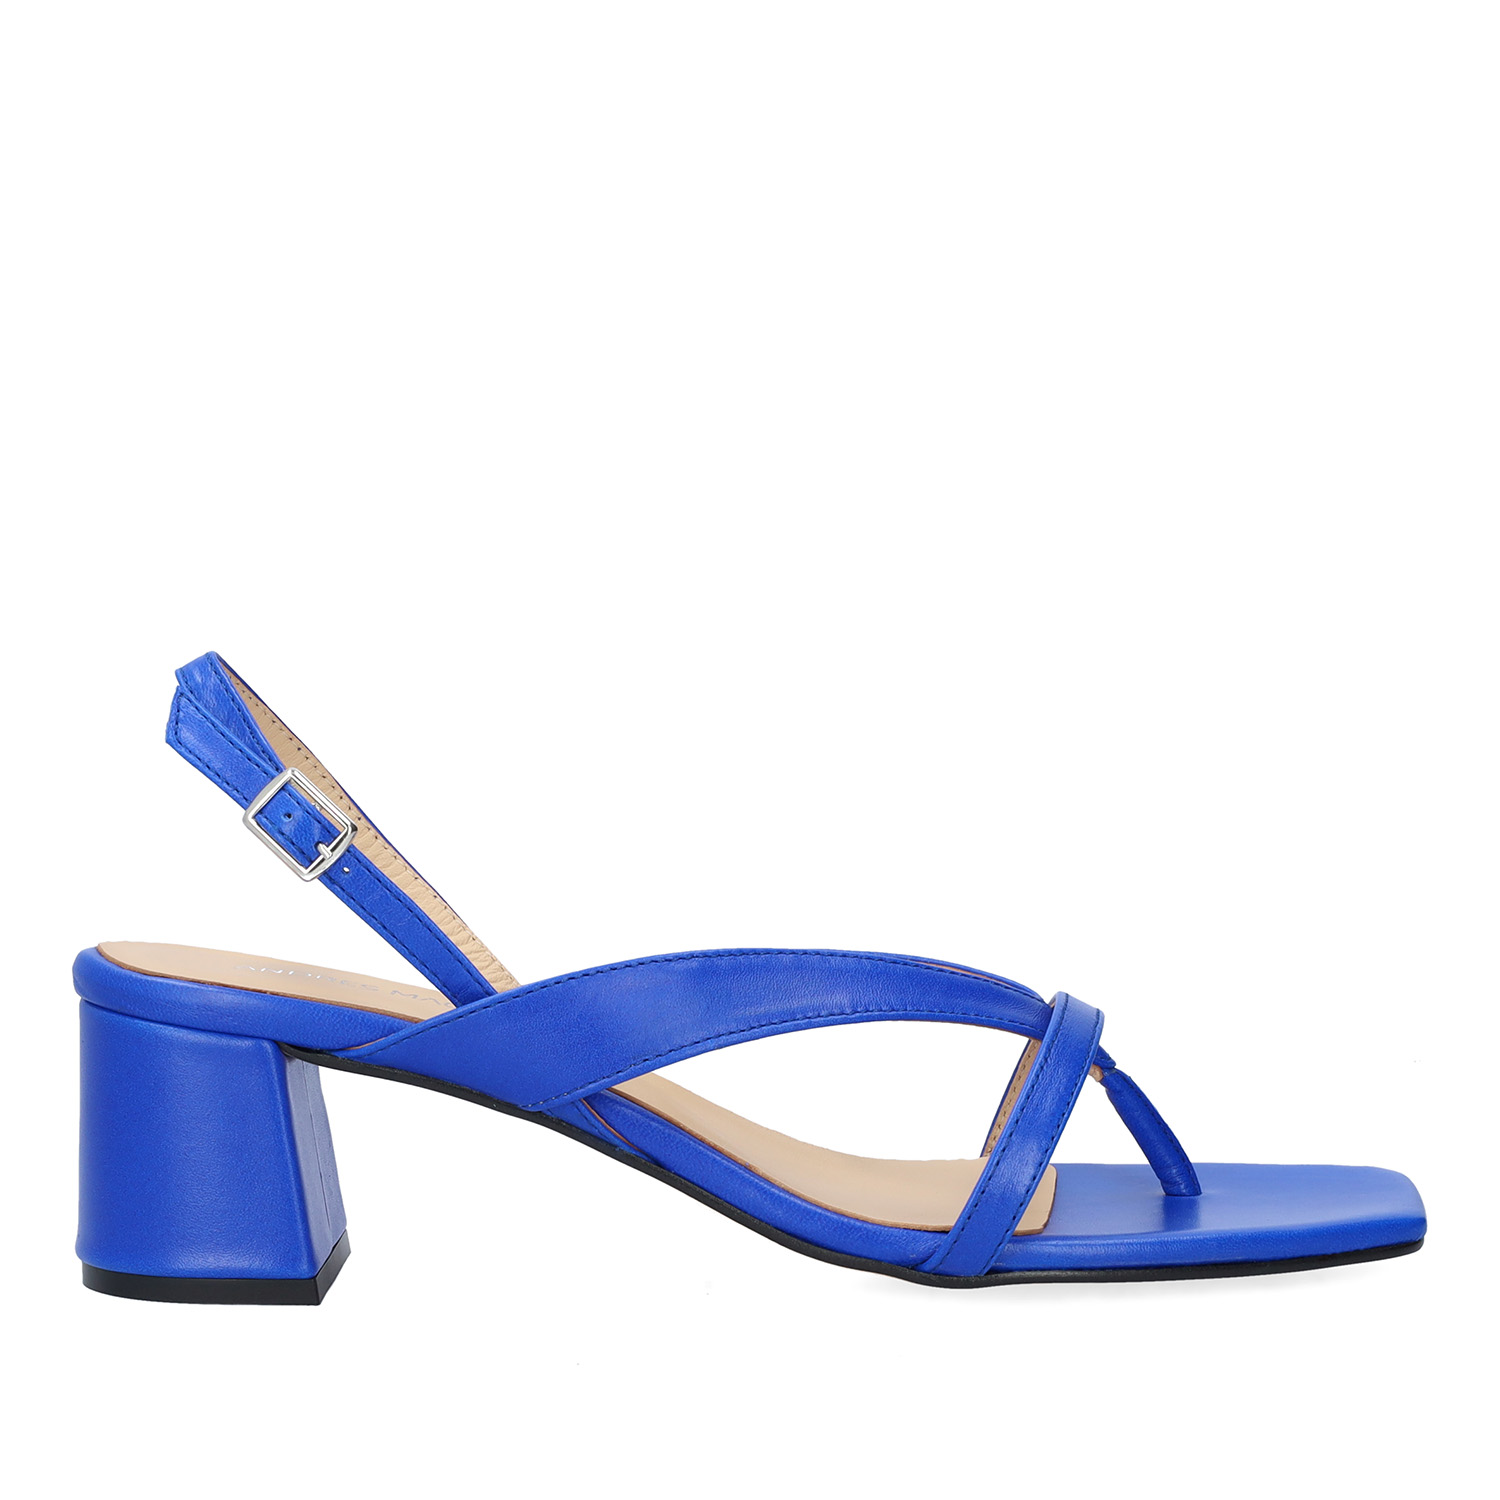 Heeled sandals in blue leather 